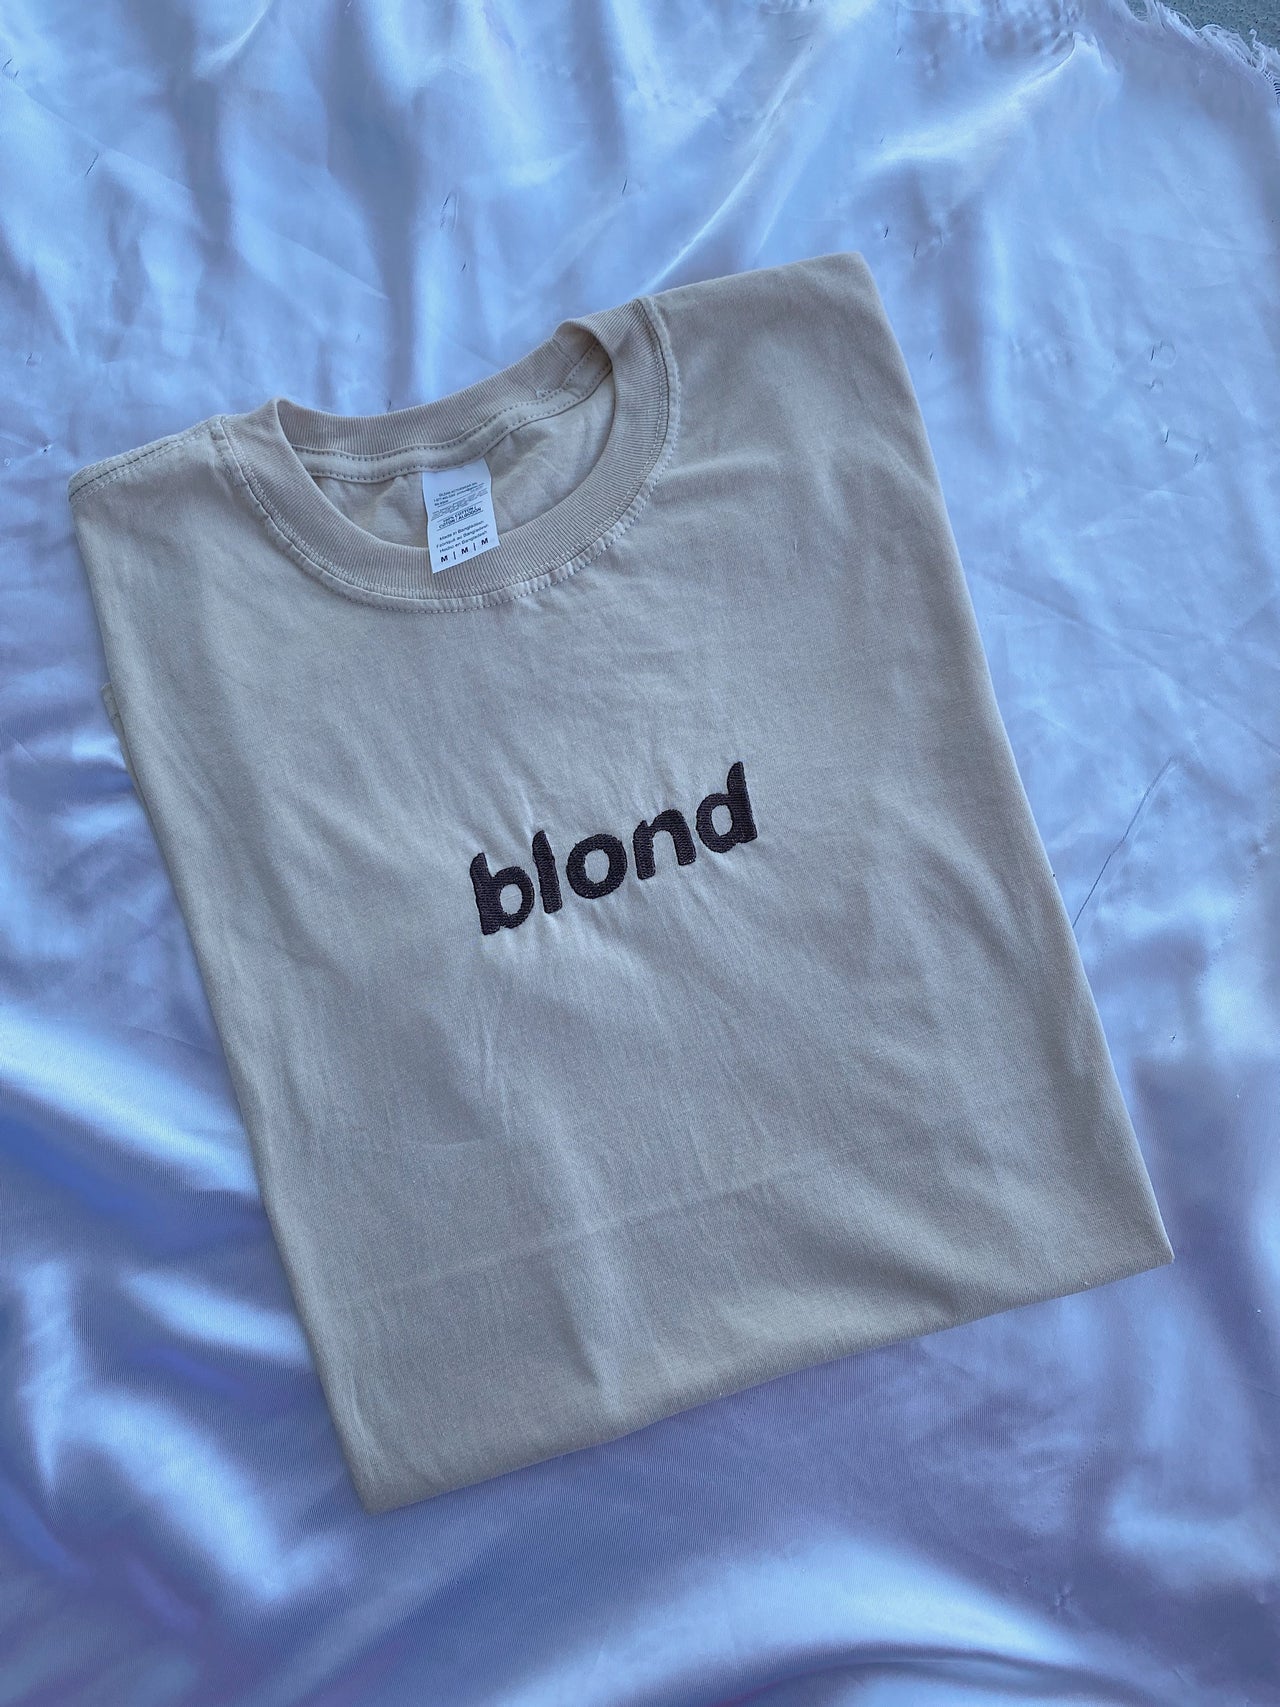 F Blond Inspired Tee